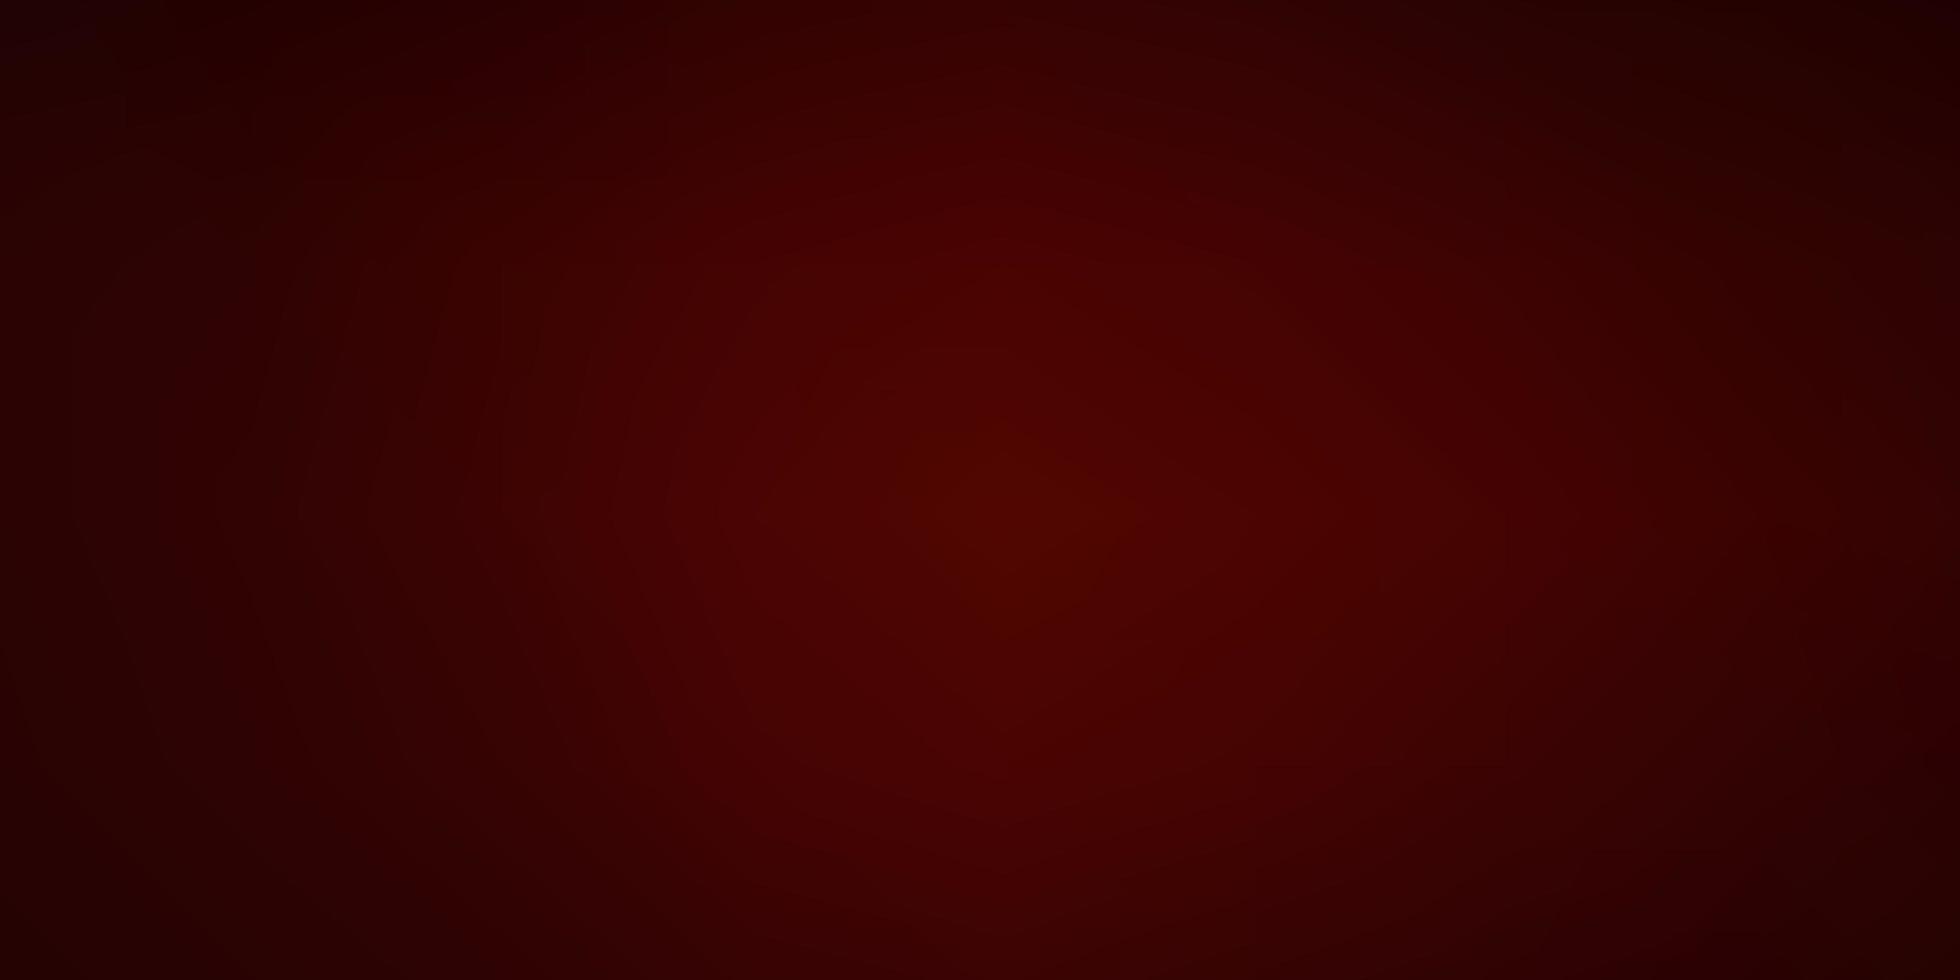 Dark Red vector blurred template Abstract illustration with gradient blur design Smart design for your apps